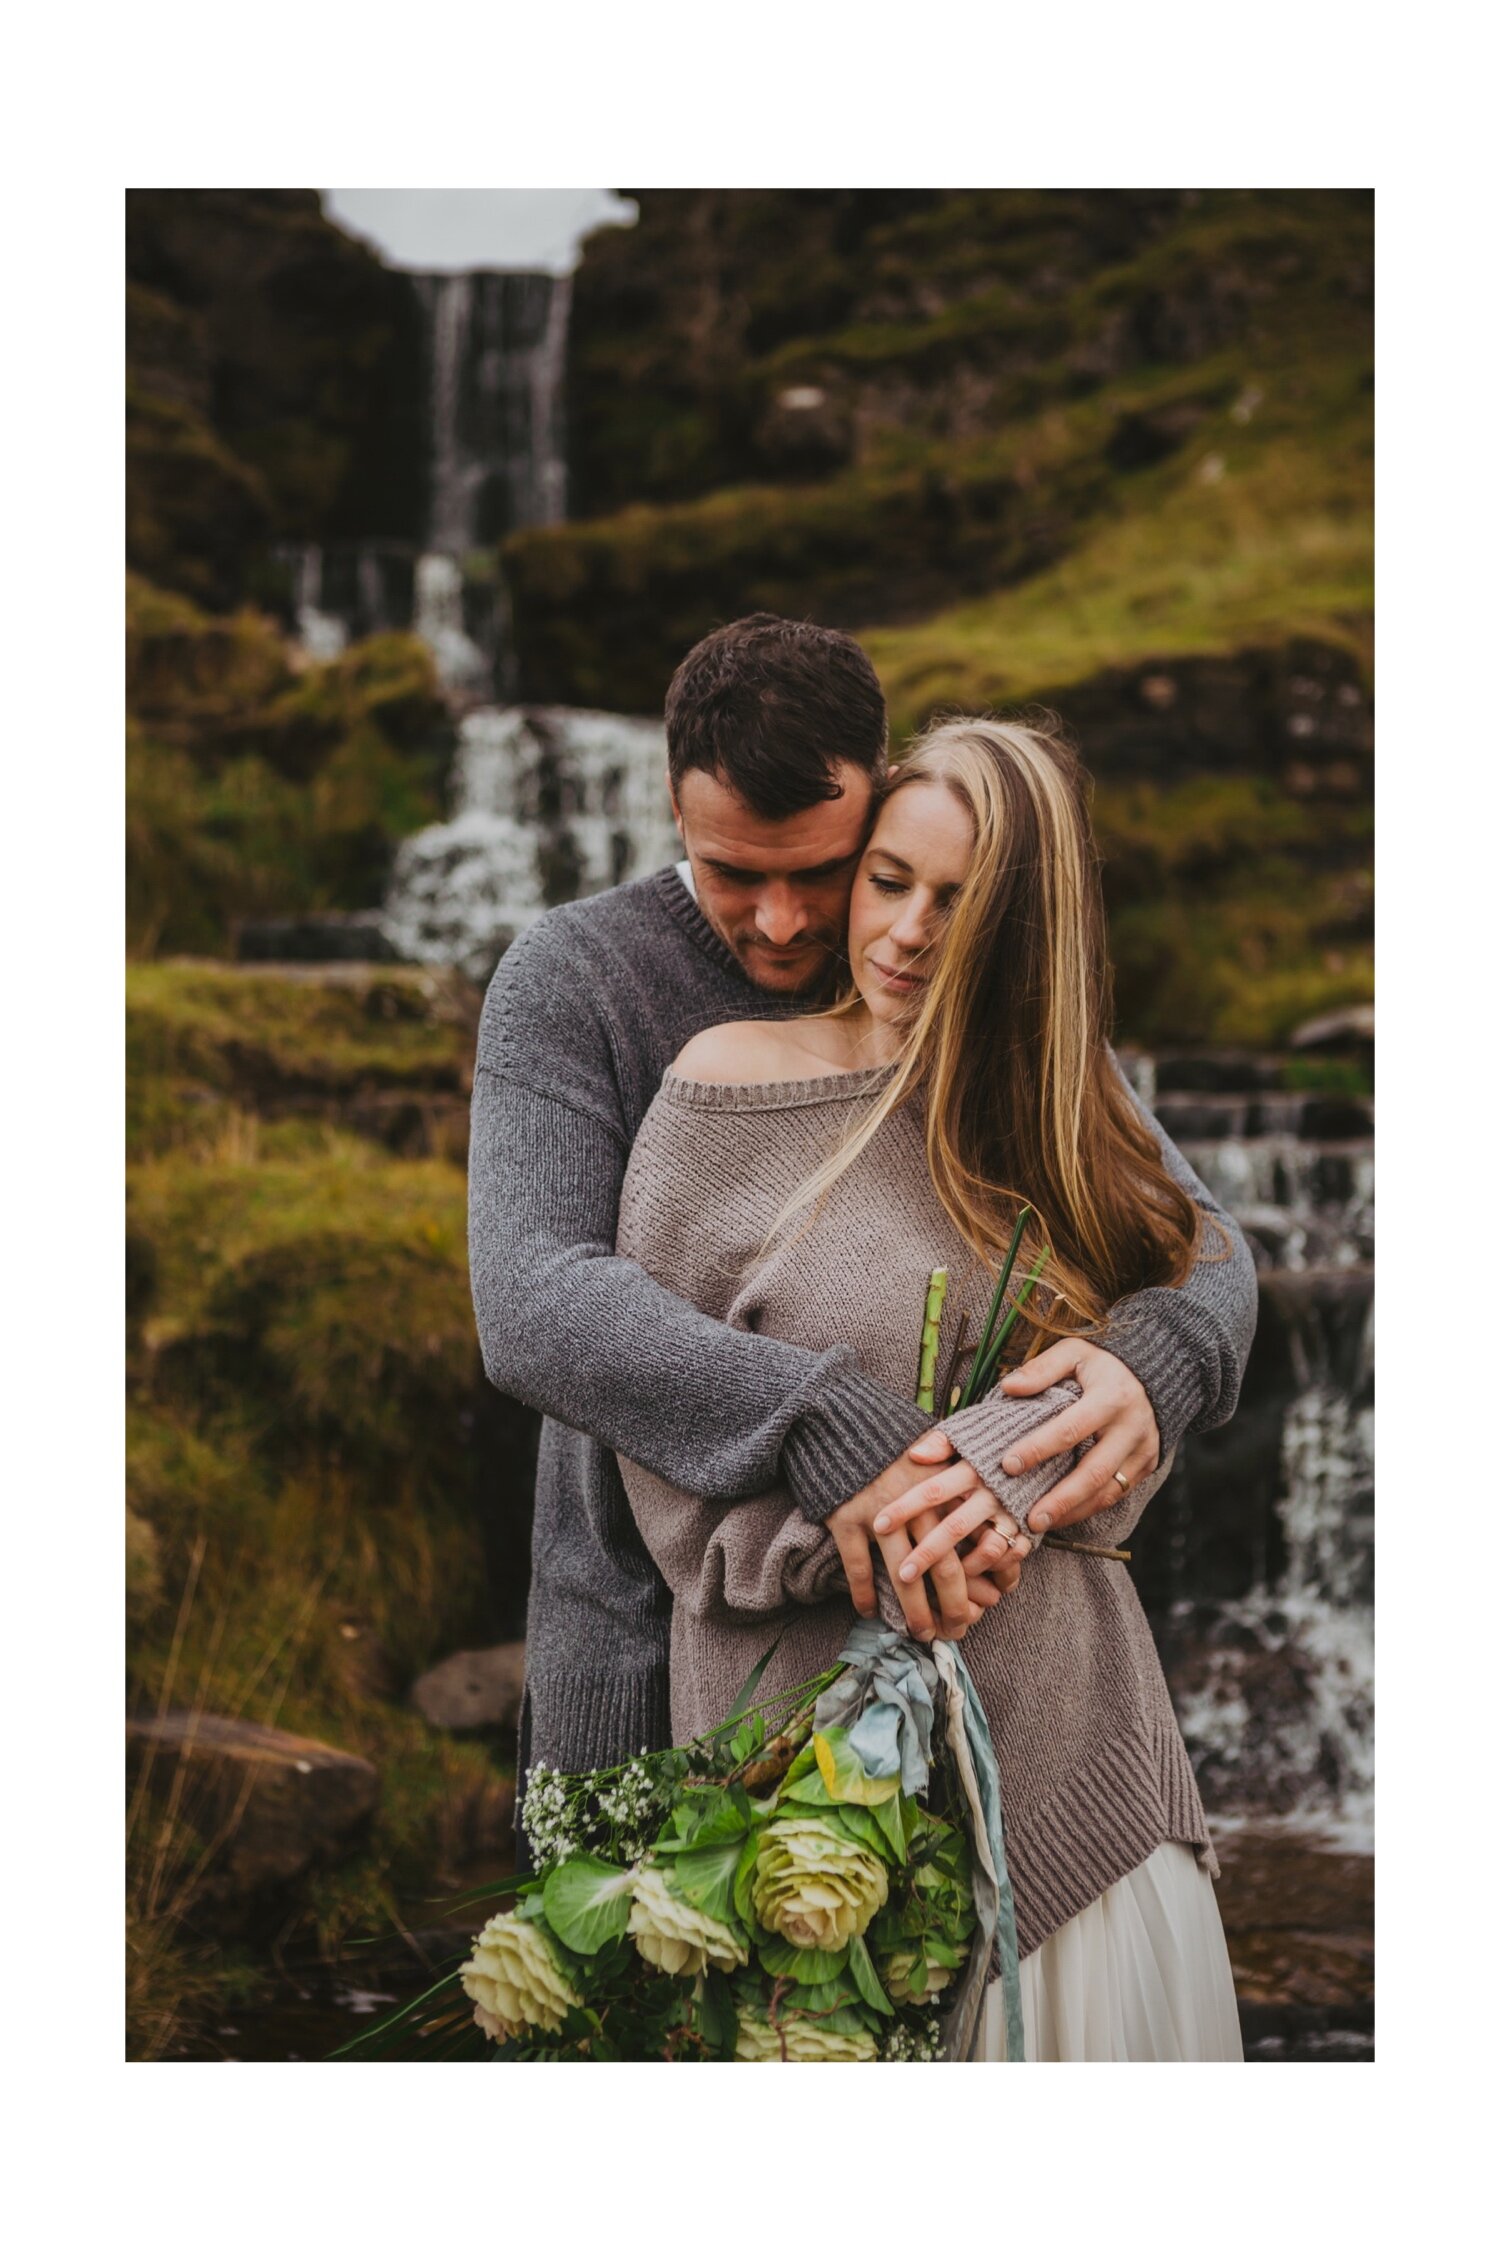 01_TWS-112__grey_dramatic_landscape_alternative_elope_alt_rock_blue_waterfall_winter_flowers_offbeat_dales_waterfalls_autumn_elopement_photography_ribbons_moody_bride_silver_wedding_yorkshire_rainy_cloudy_cosy_weather_photographer_florals_groom.jpg